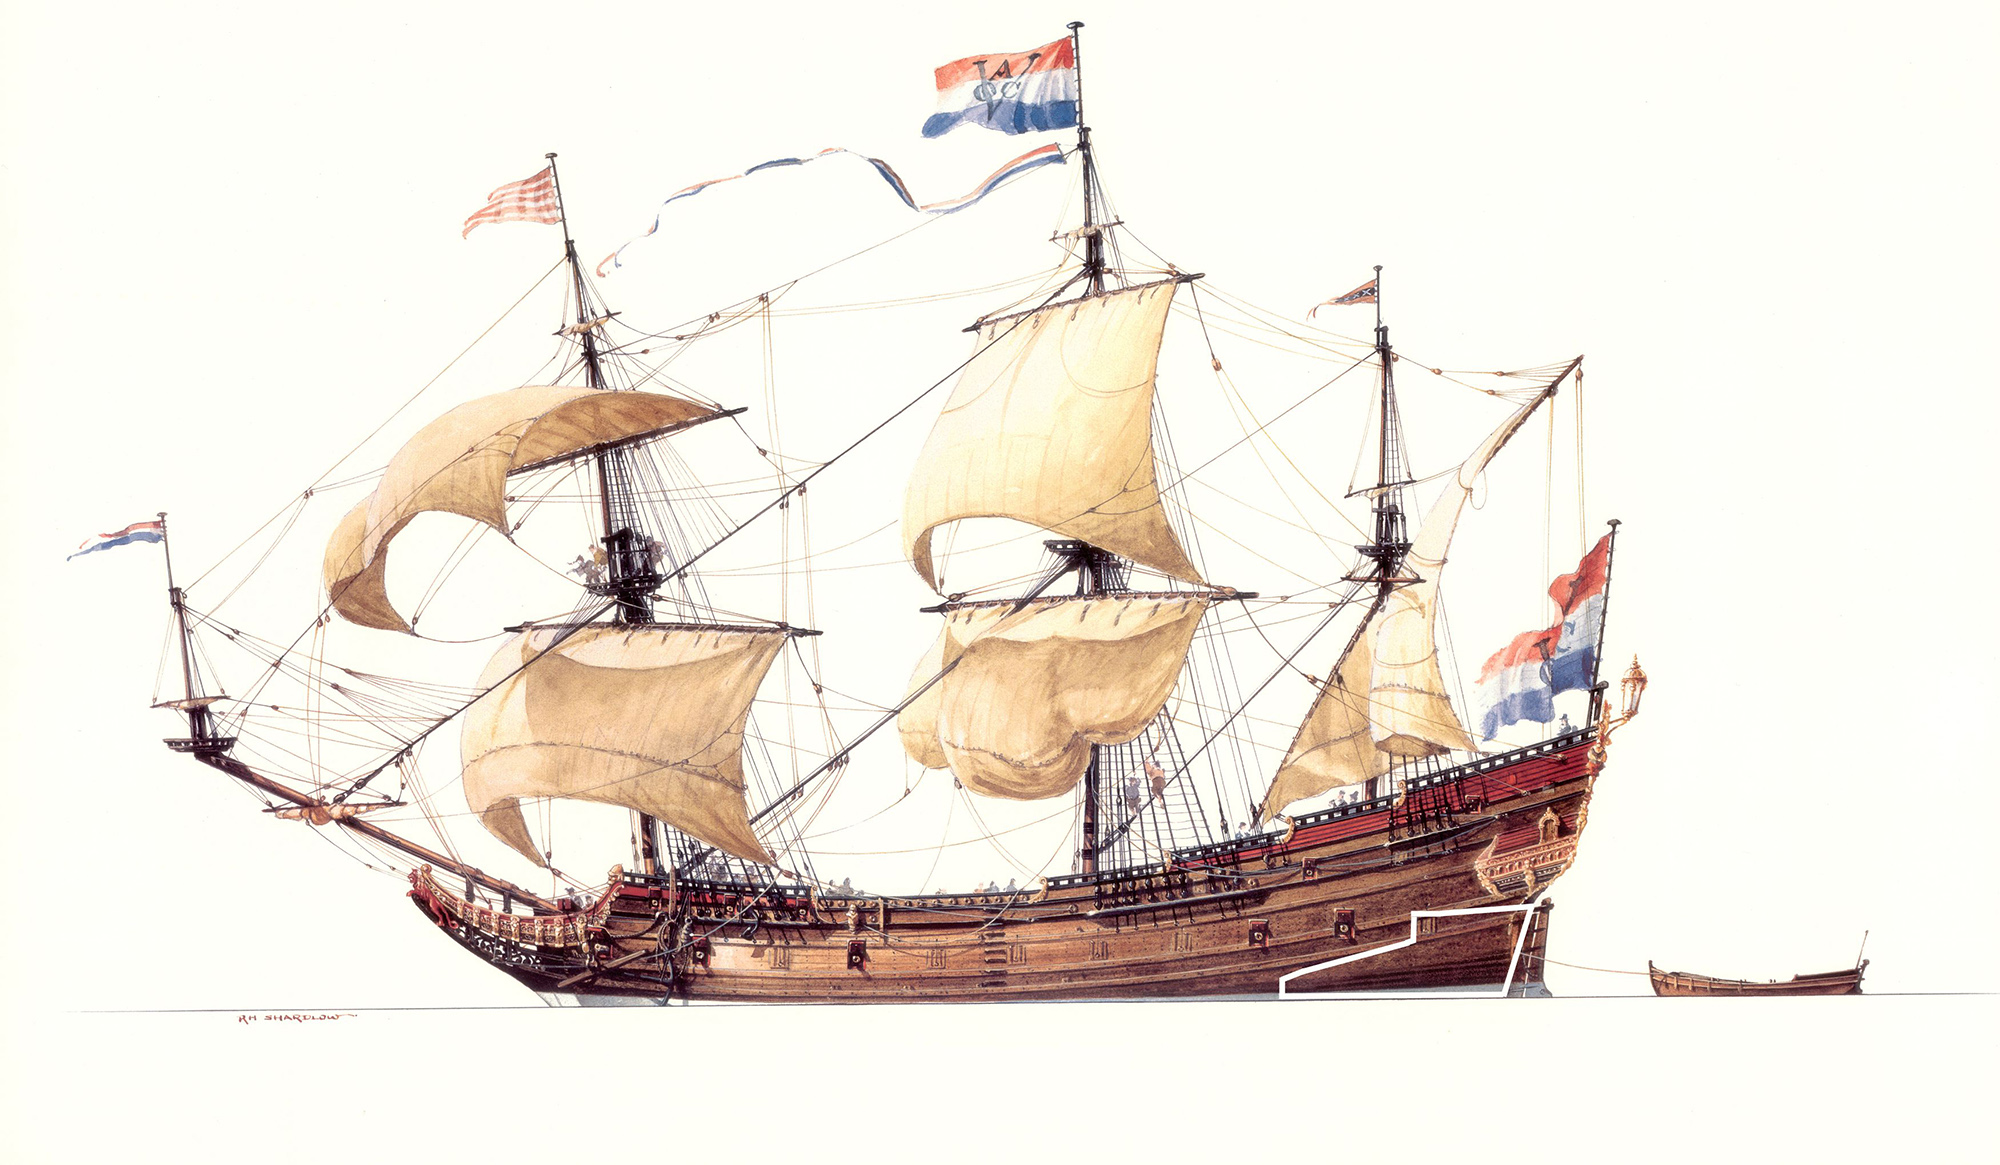 Artist's impression of the 1629 Dutch ship Batavia. The white line indicates the preserved section of the port-side transom raised from the shipwreck site. (Ross Shardlow/Zenger)